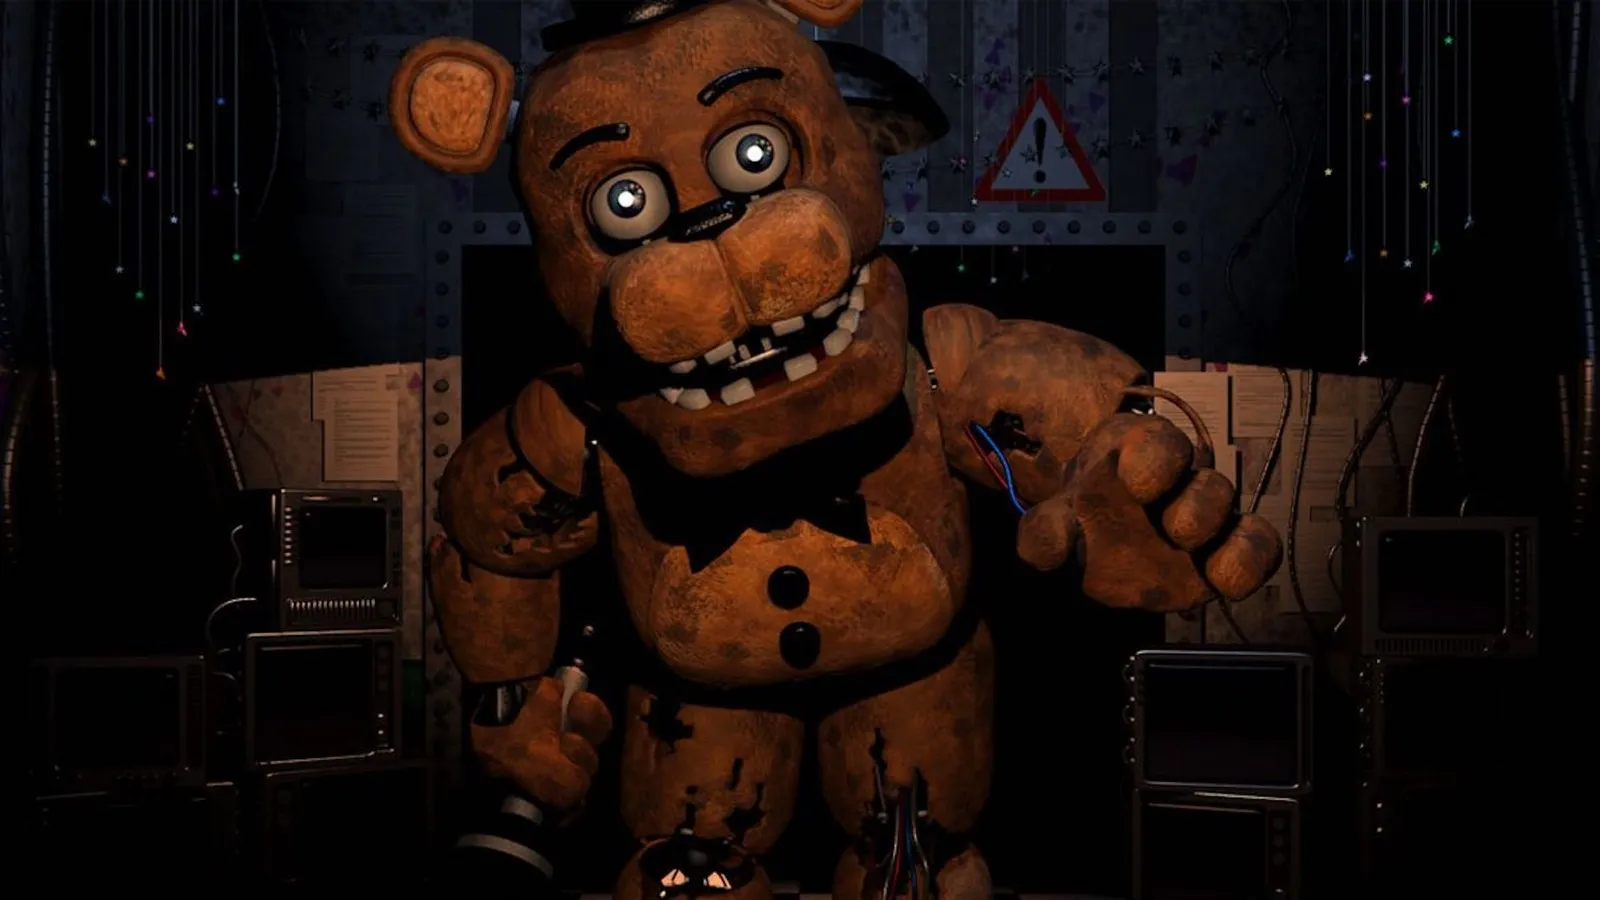 9 New Characters We Want In Five Nights At Freddy's 2